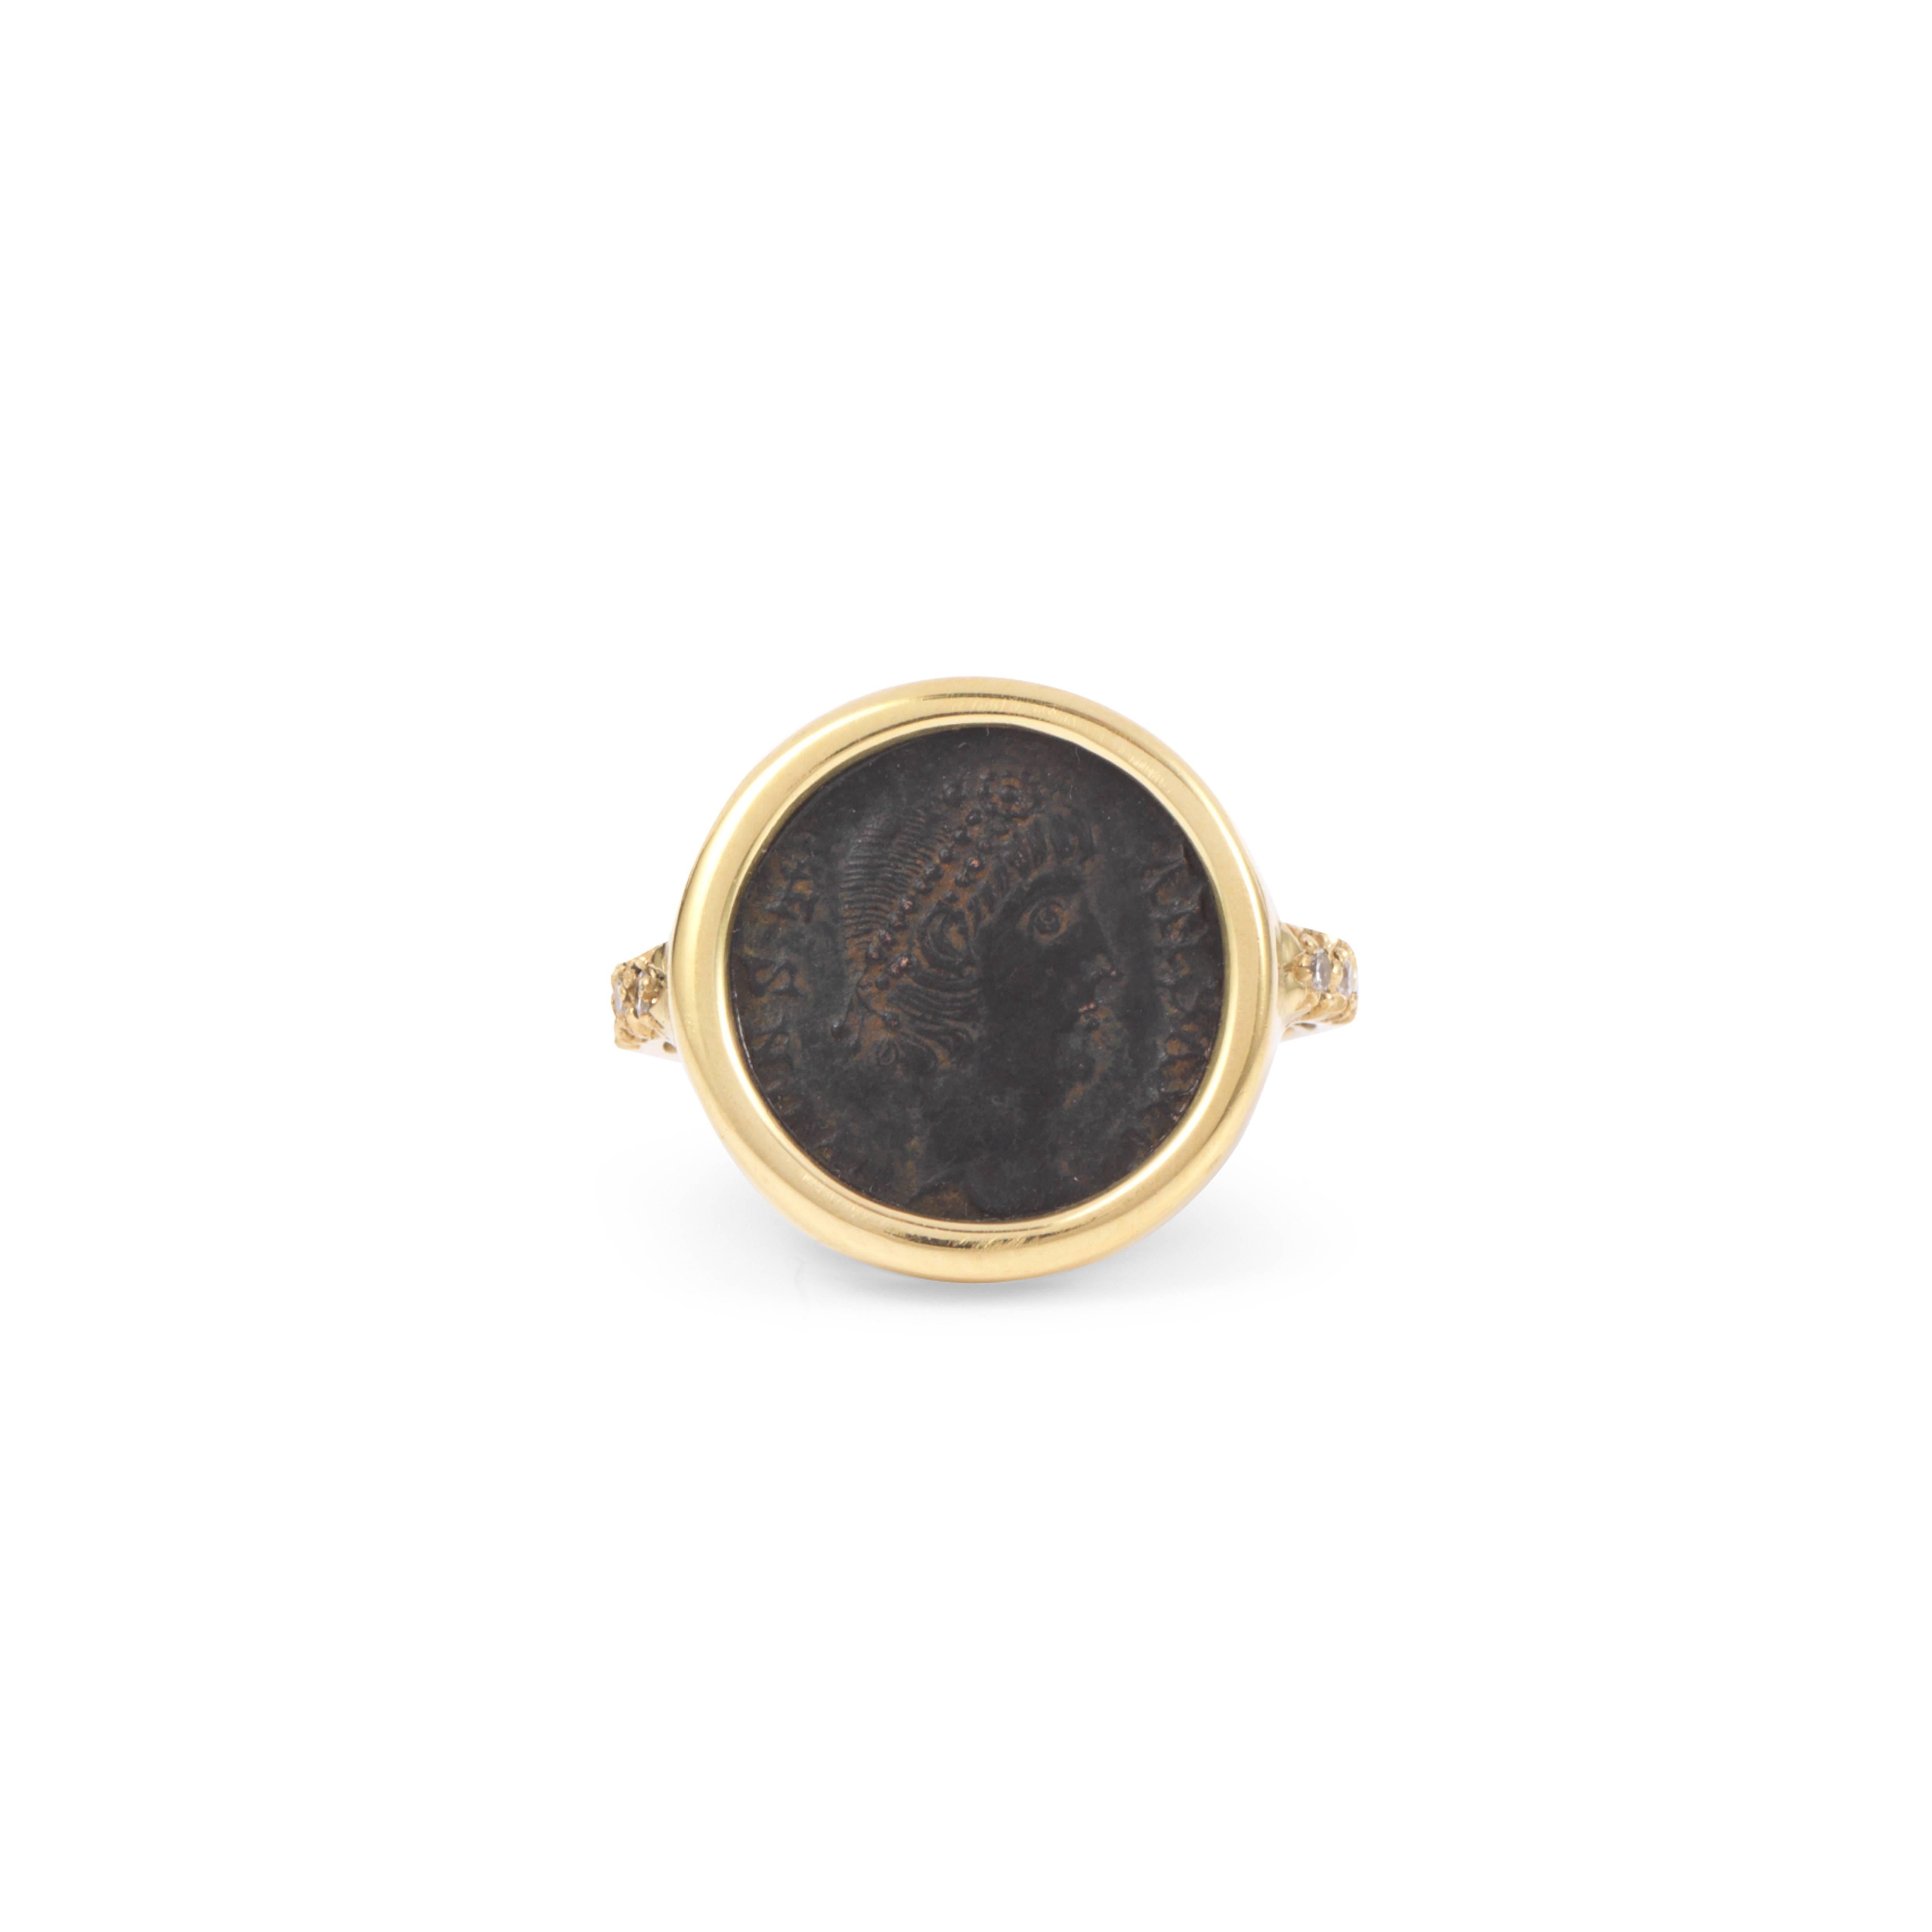 This DUBINI coin ring from the 'Empires' collection features an authentic Roman bronze coin set in 18K yellow gold with diamonds.

Ring size available: 52 (US 6)

The ring may be resized with a lead time of 1 week.

* Due to the unique process of